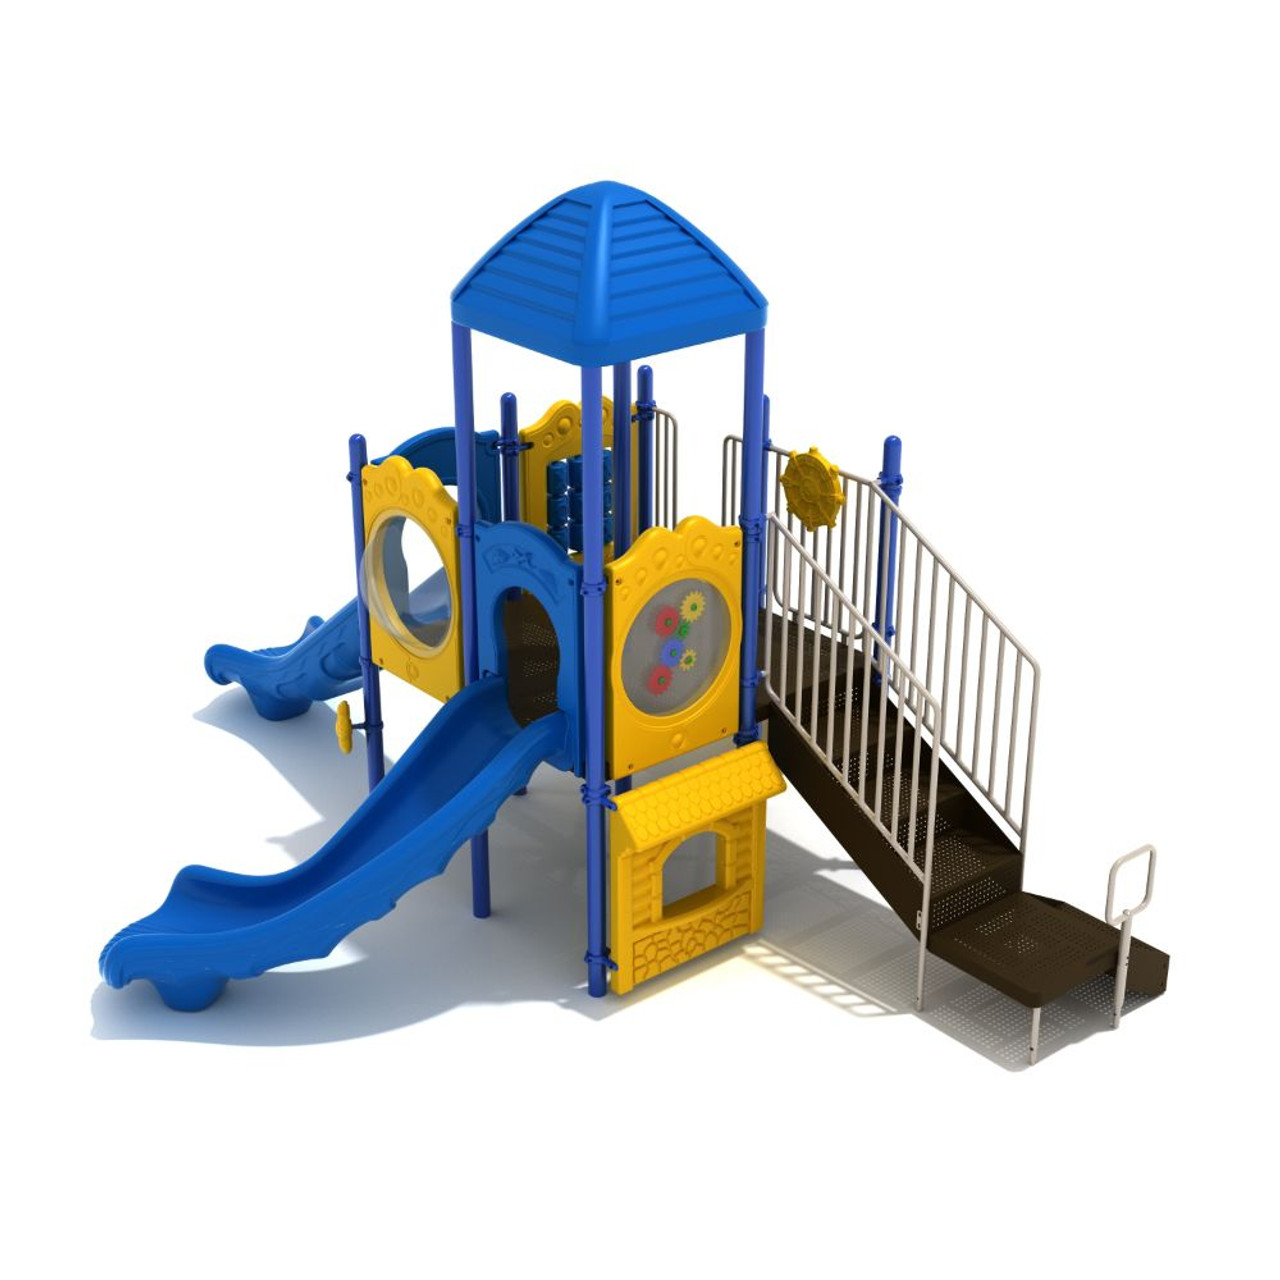 Sioux Falls Playset